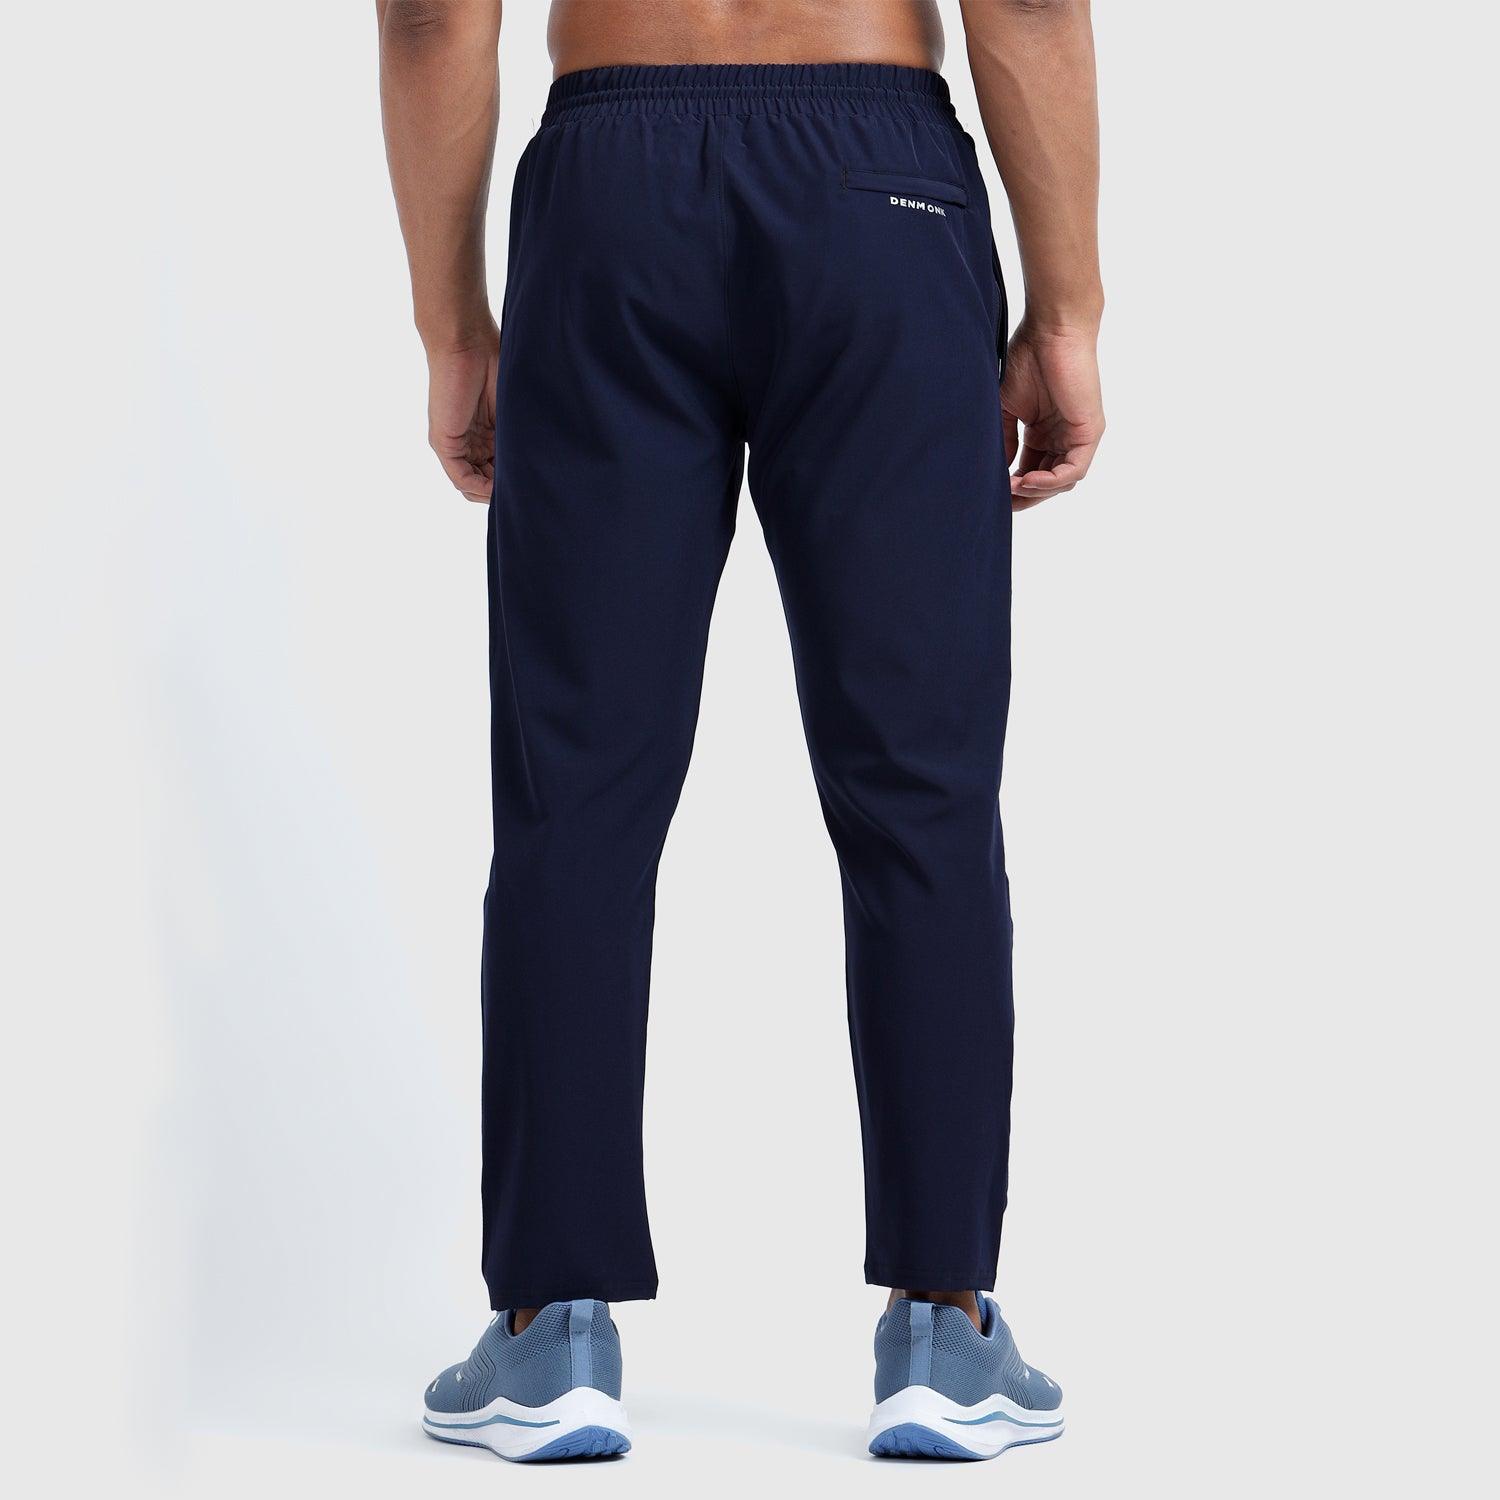 Denmonk: Elevate your look with these stayactive sharp midnight navy Trackpant for mens.